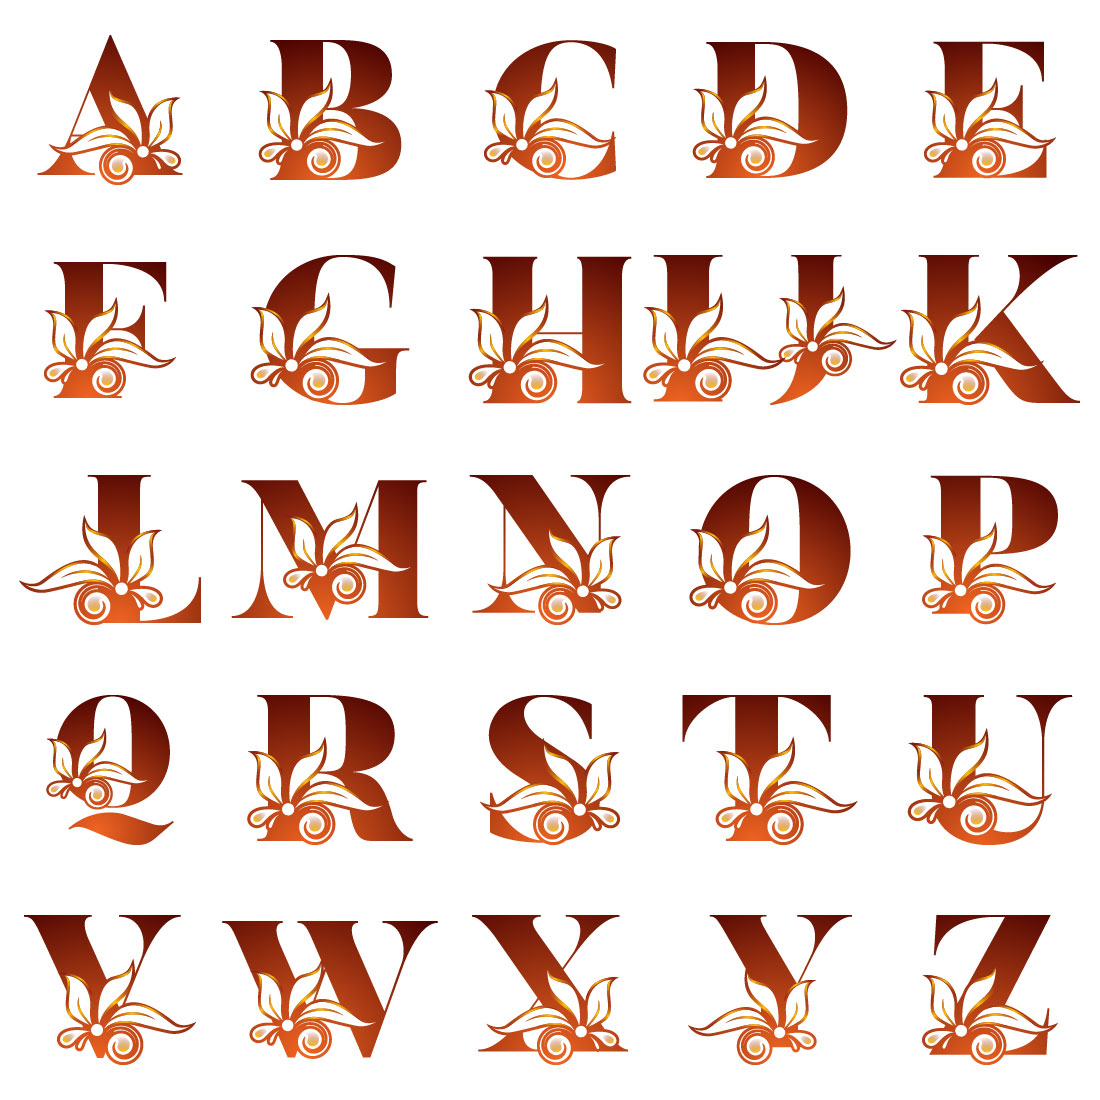 Charming image of the letters of the alphabet in a floral design